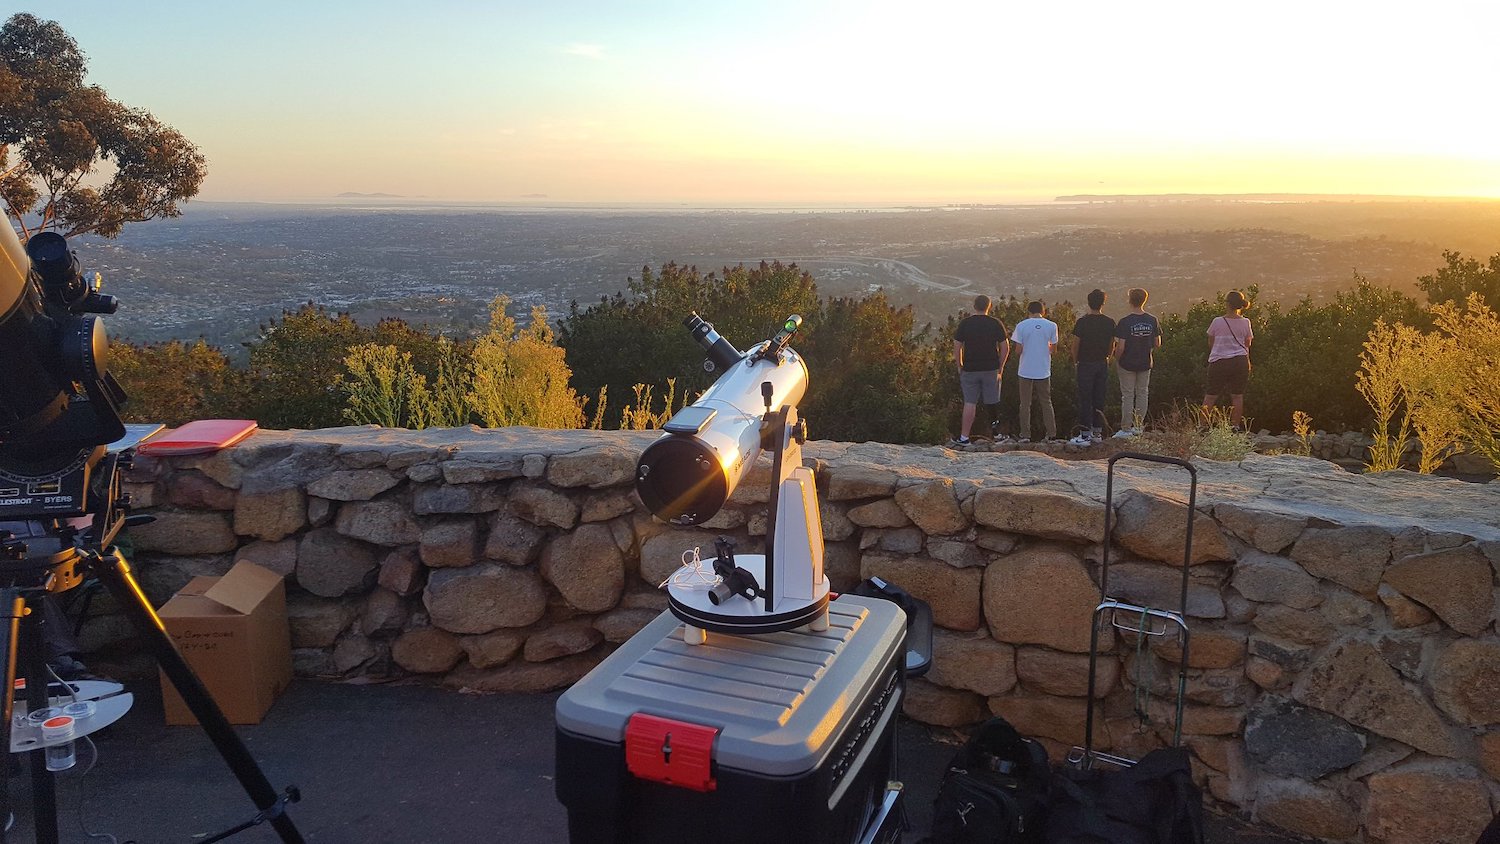 Things to do in San Diego that don't involve alcohol featuring the San Diego Astronomy Association star party events